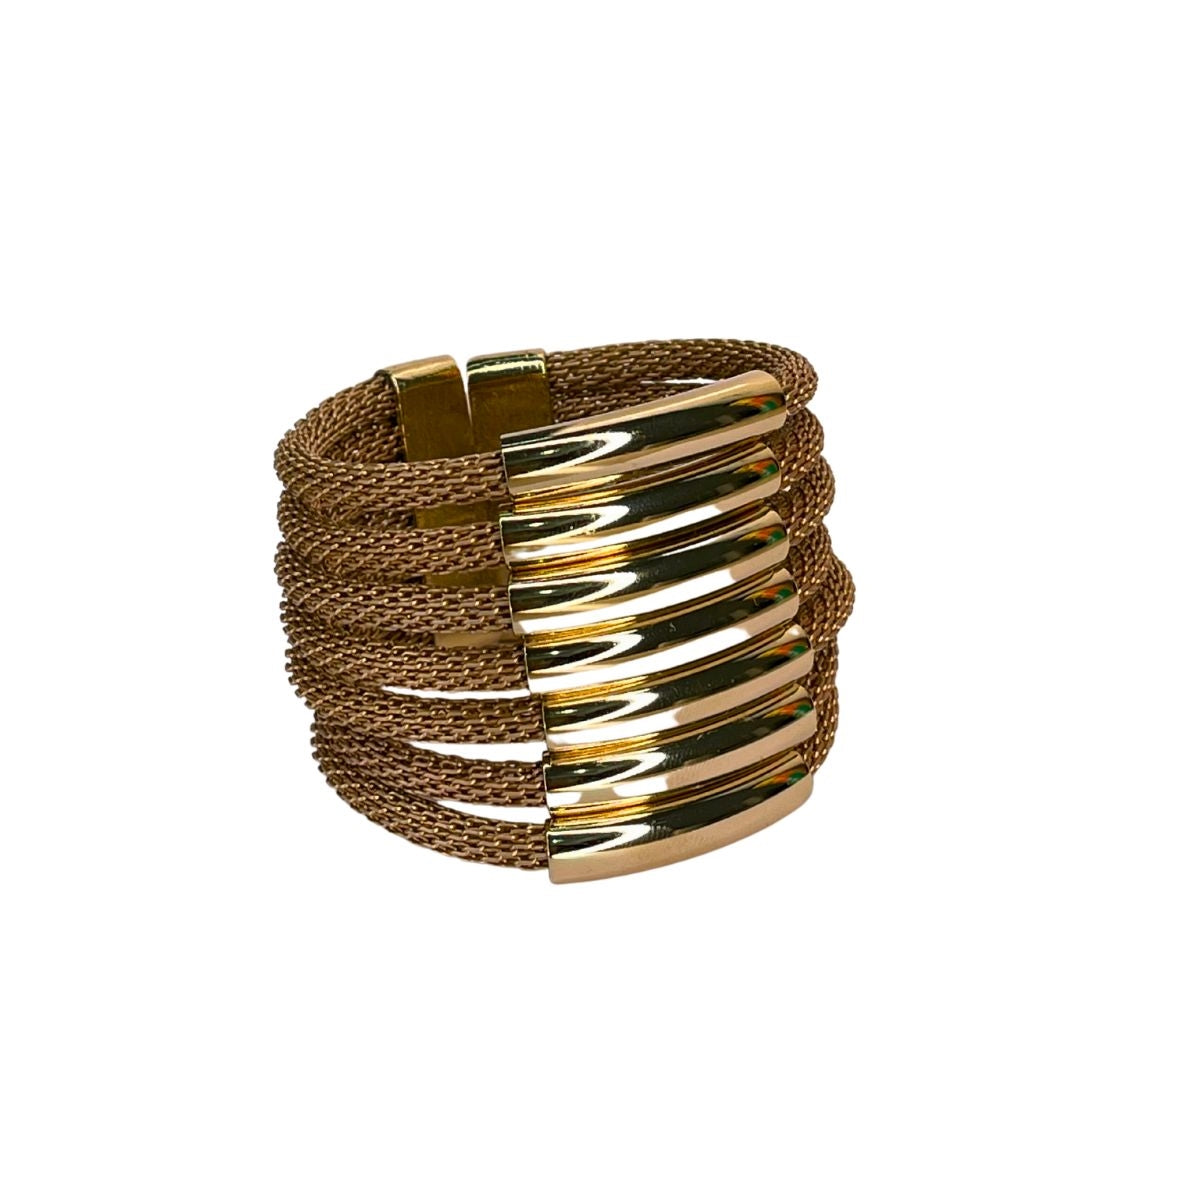 Antonella bracelet with pink aluminum mesh and gold-plated metals